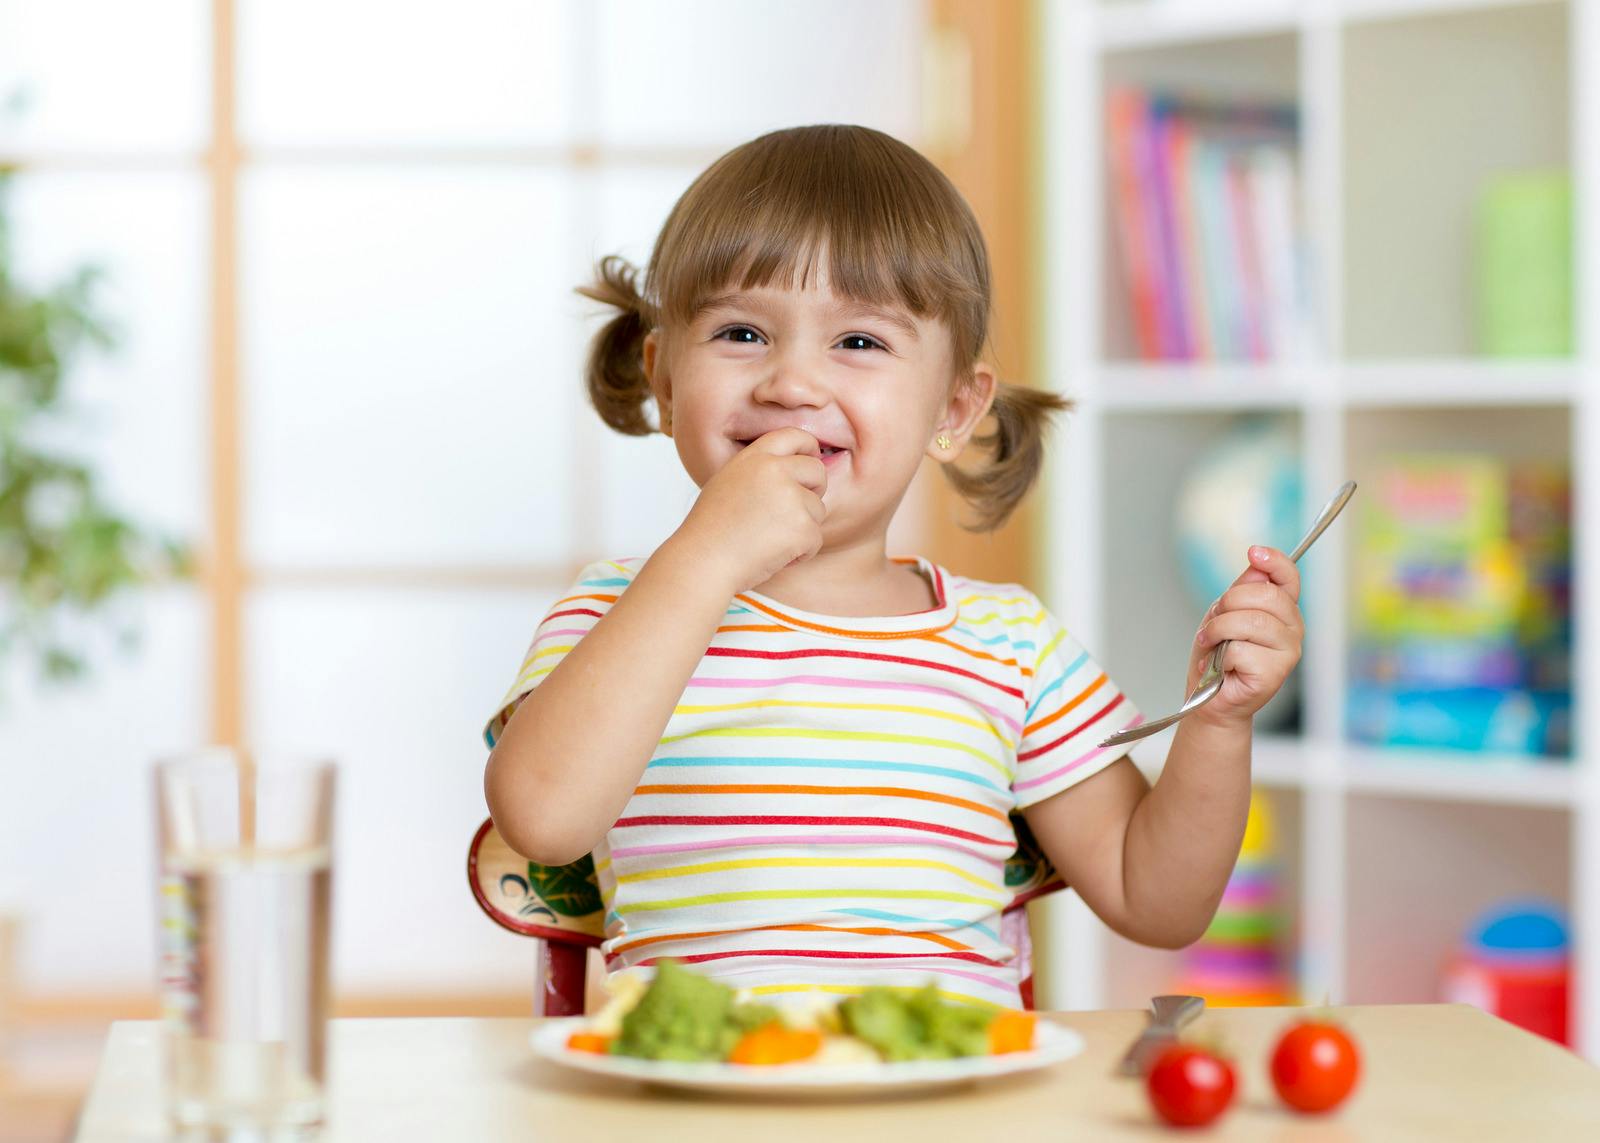 Child smiling while eating food